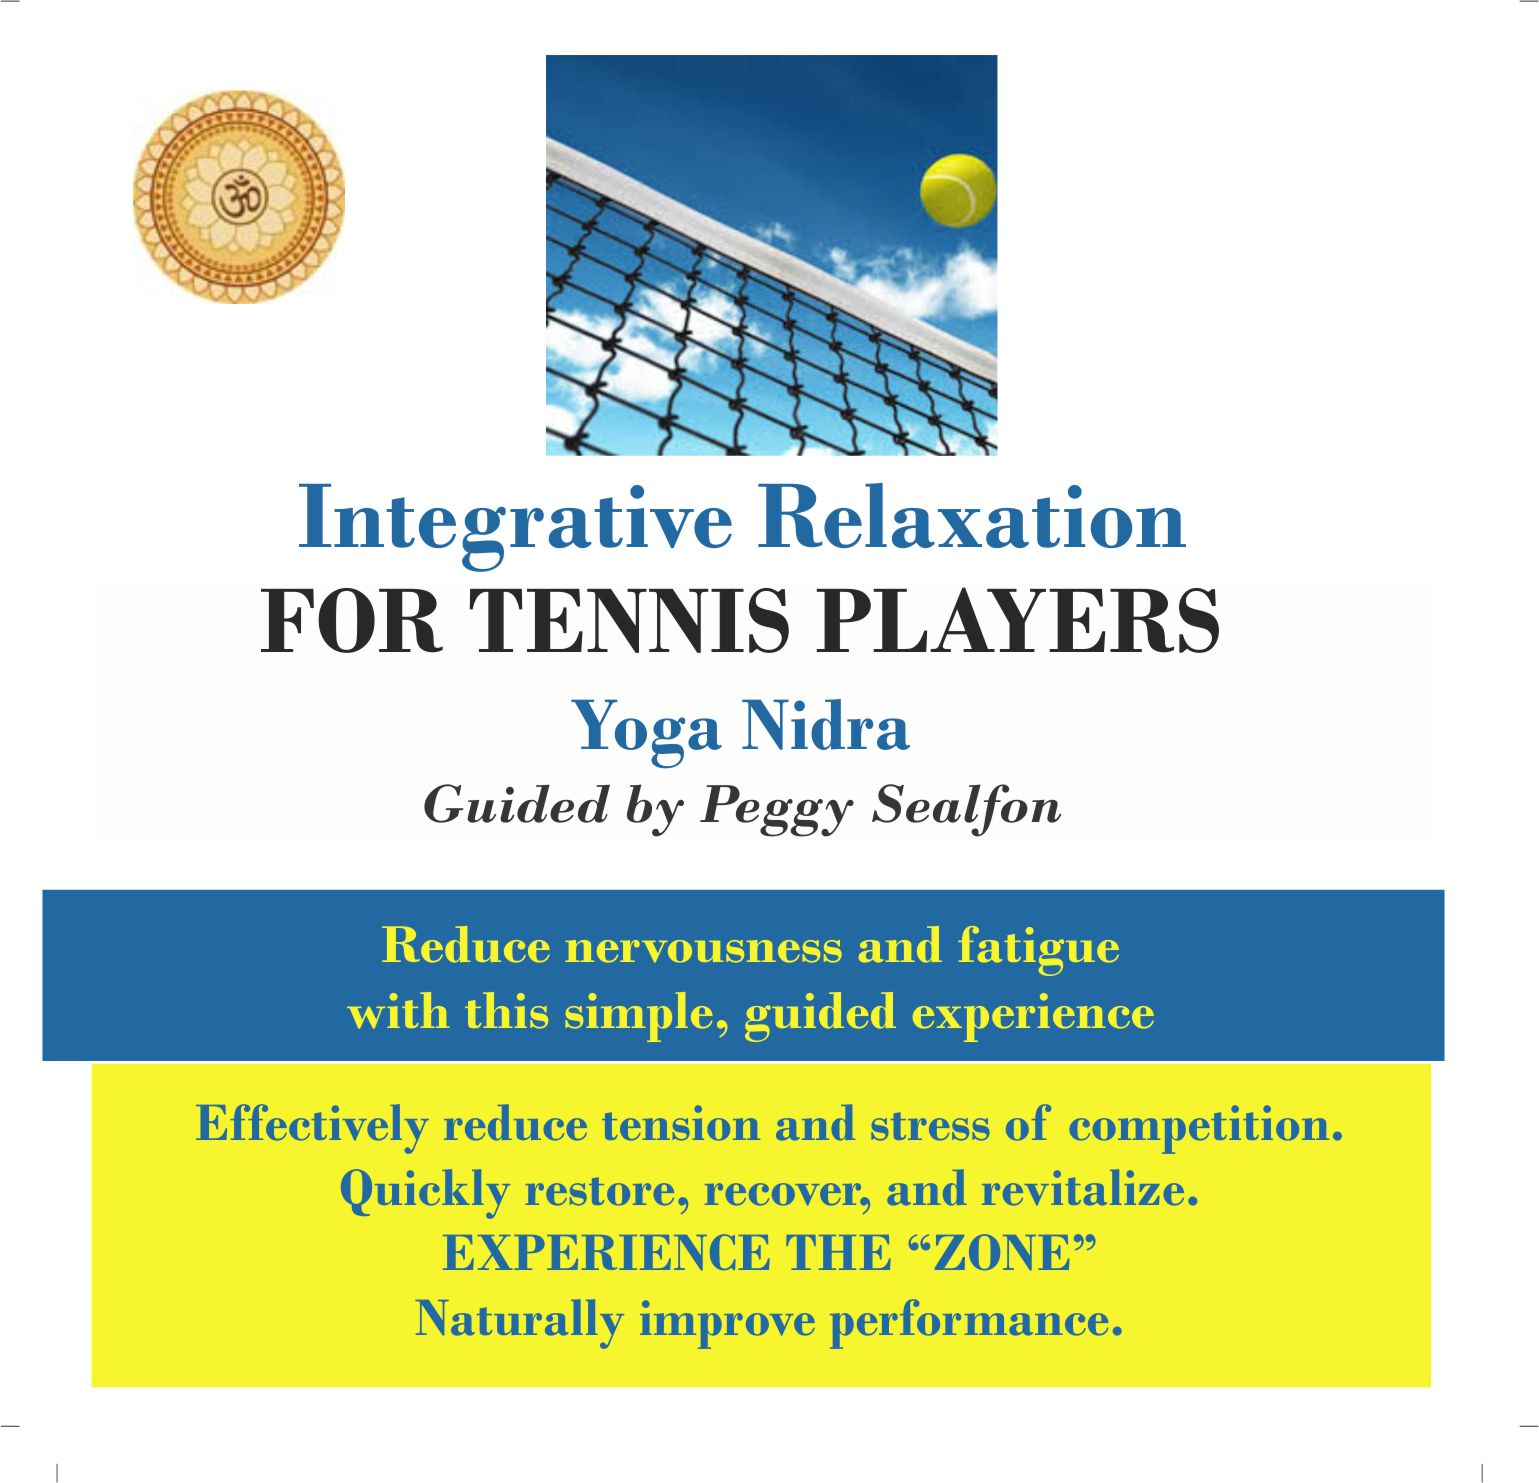 Integrative Relaxation for Tennis Players